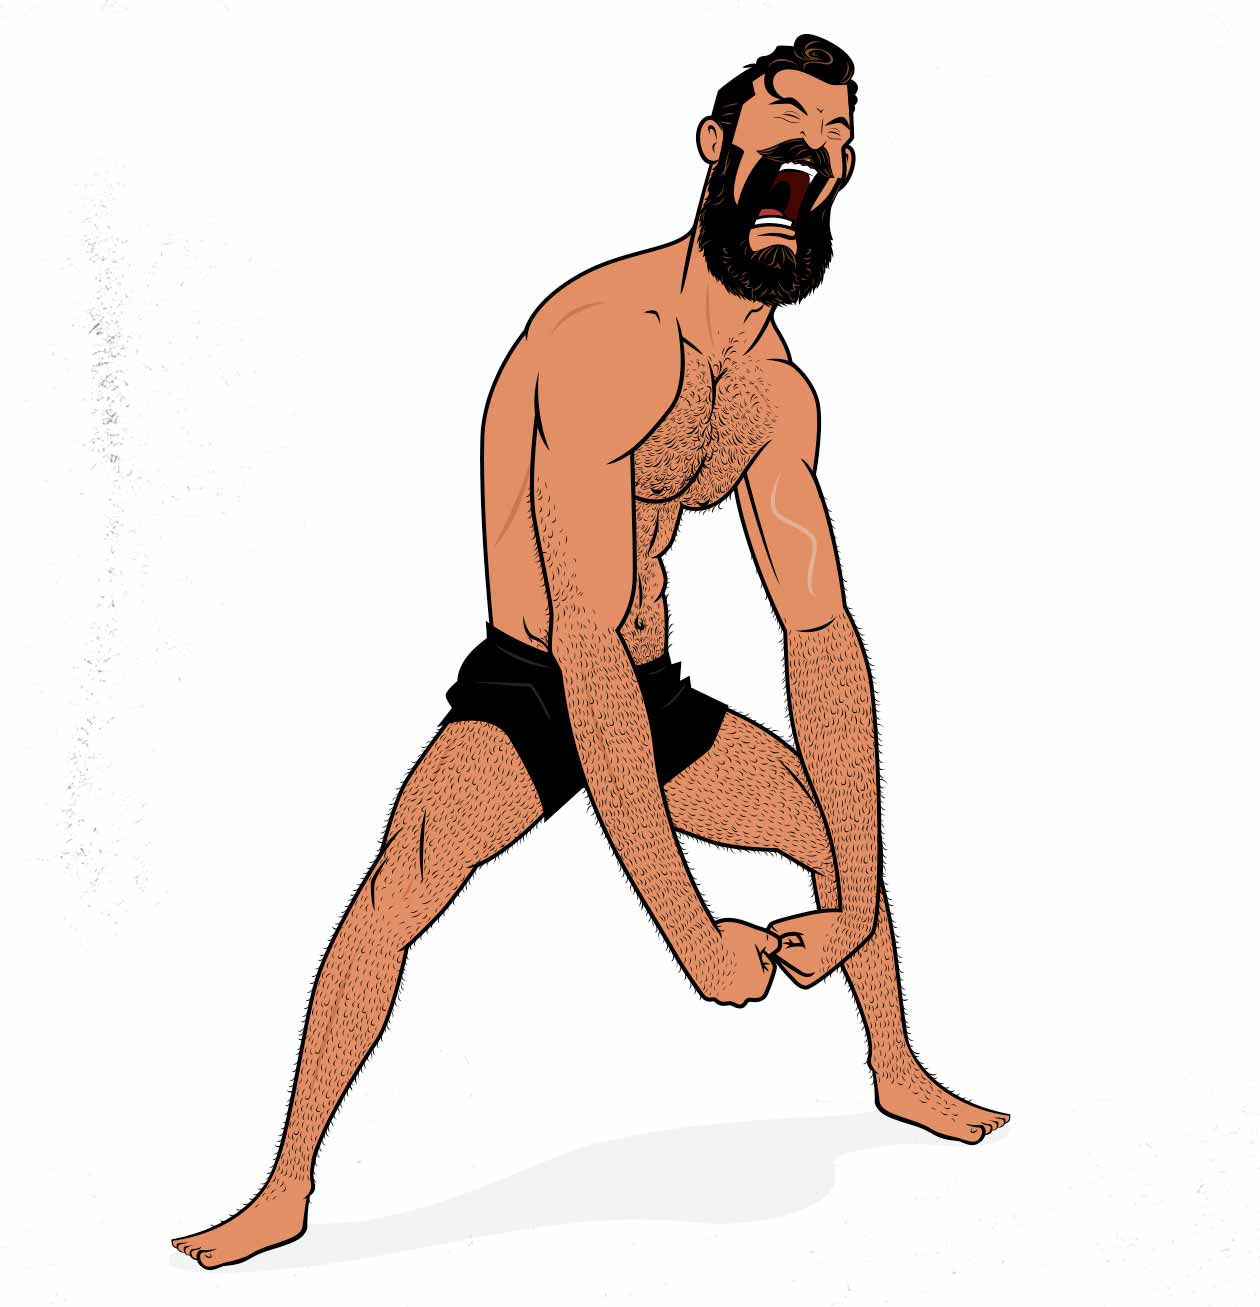 Illustration showing a man flexing the muscle he built.